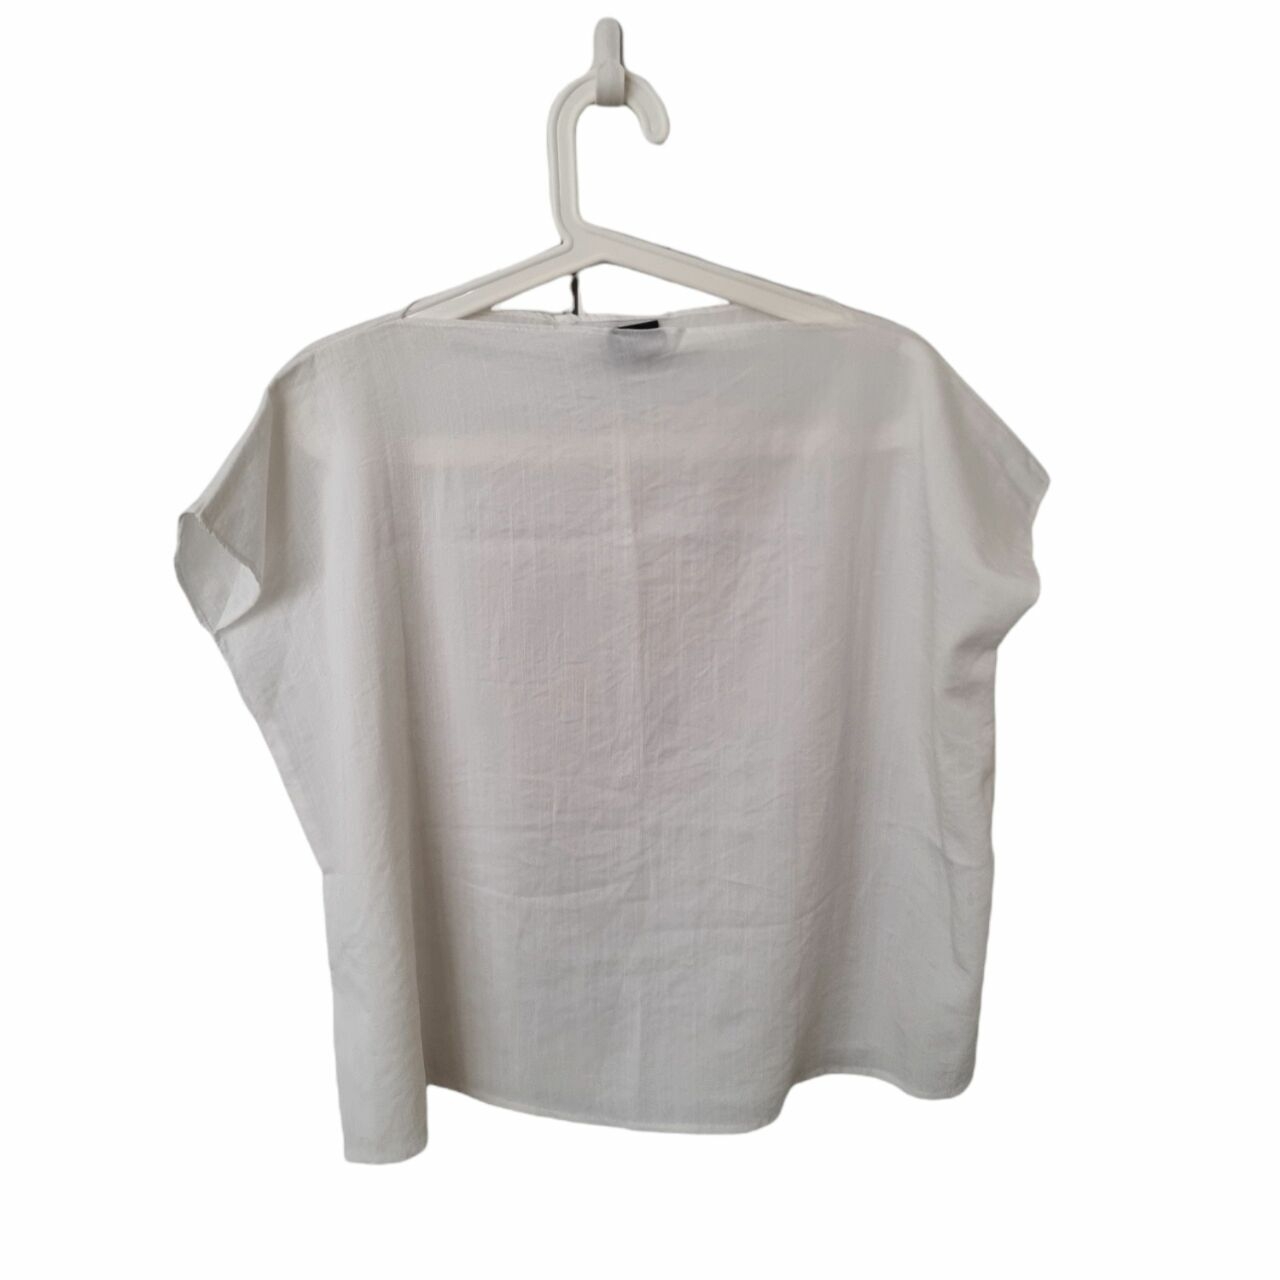 This is April White Boxy Blouse